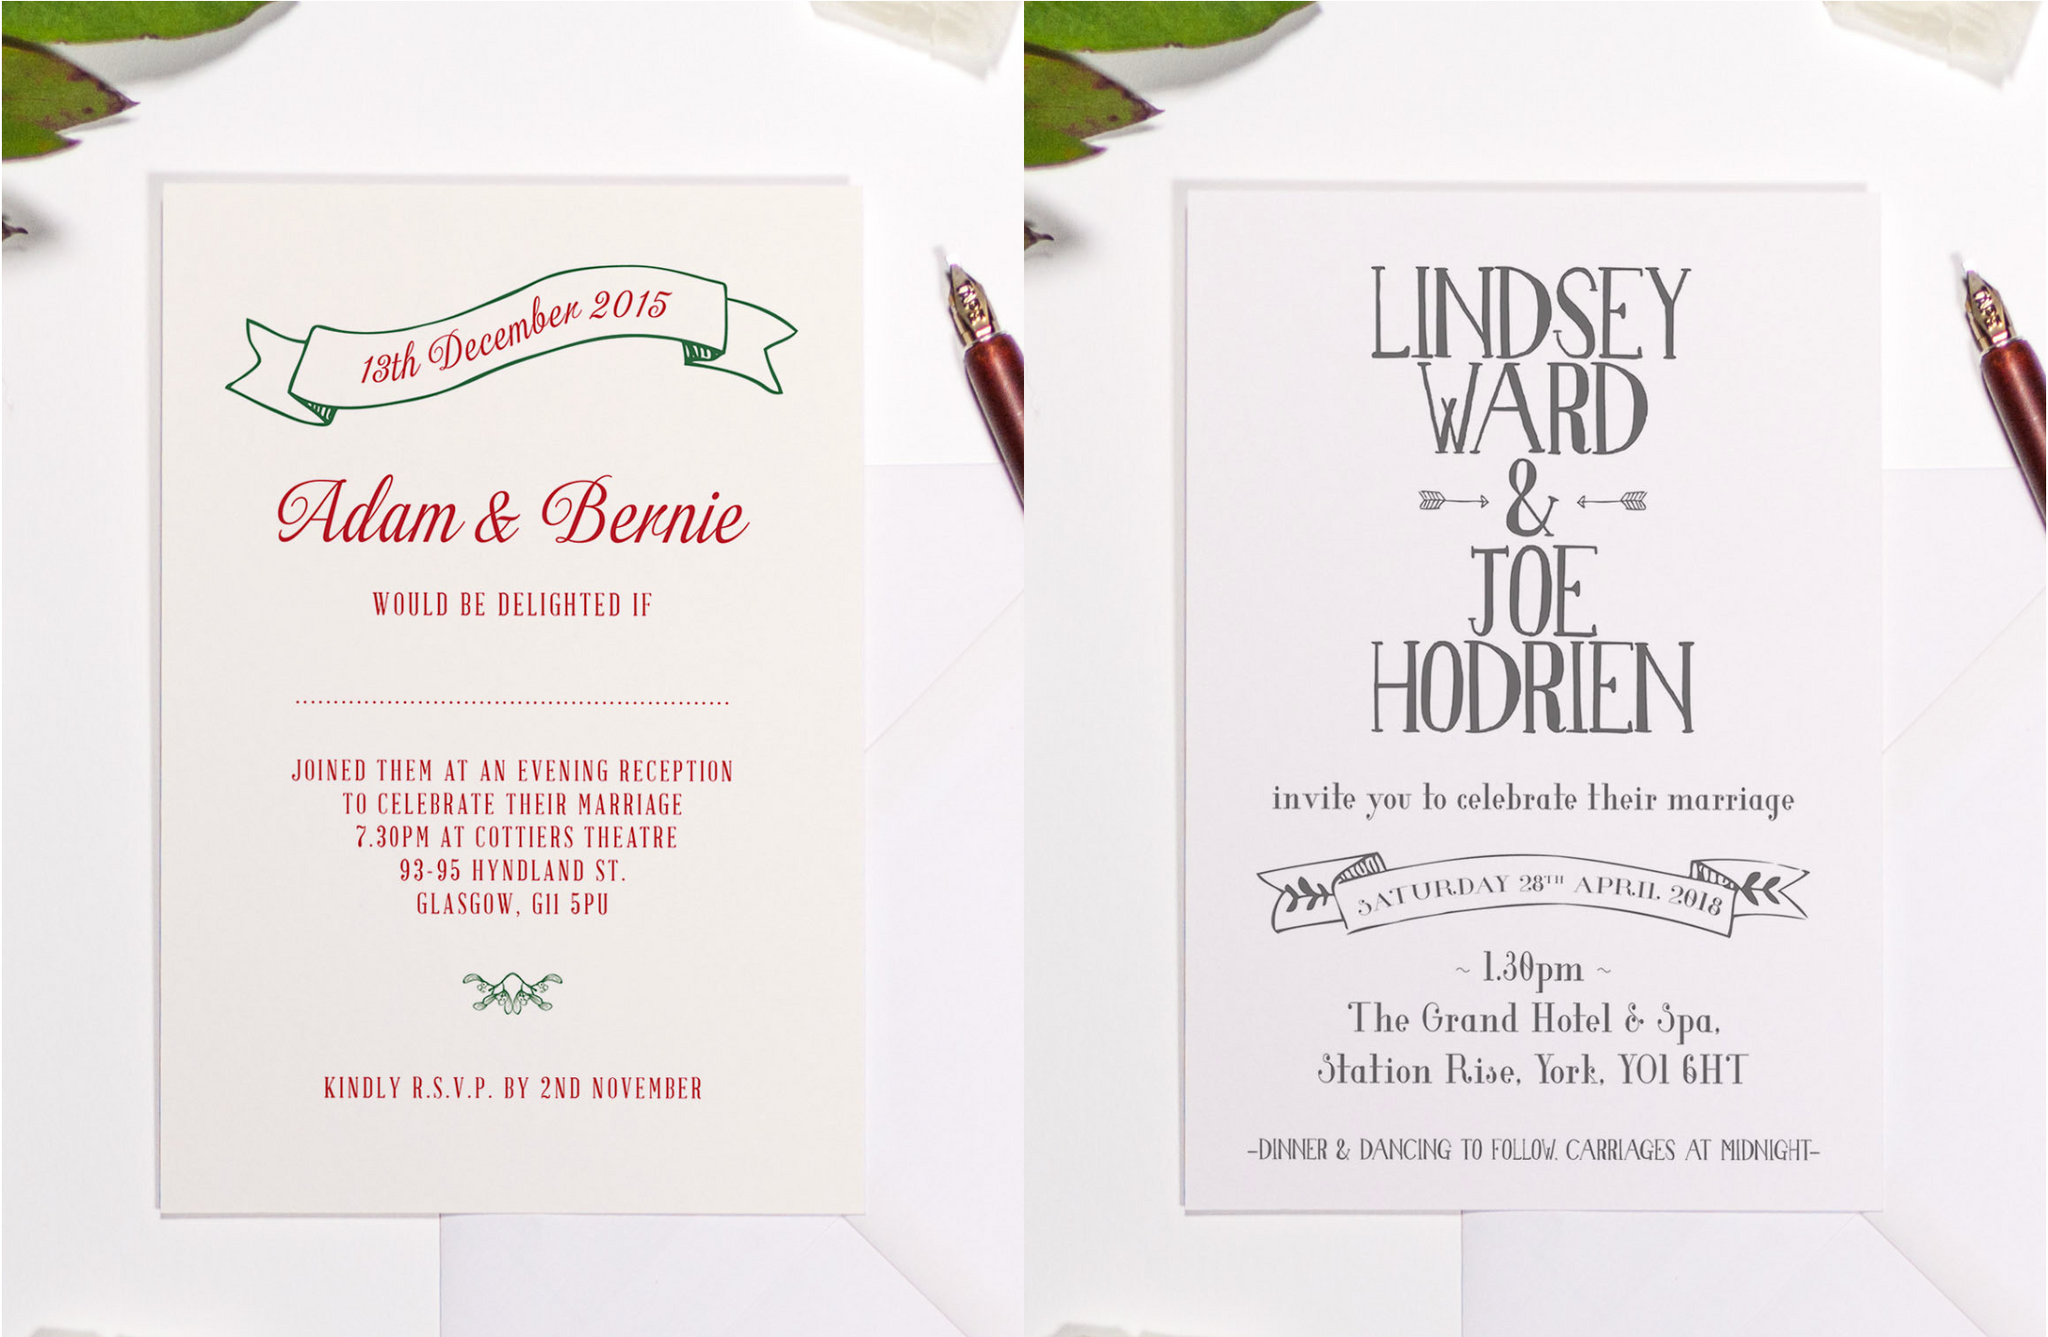 3-creative-ways-to-how-to-politely-ask-for-gifts-on-an-invitation